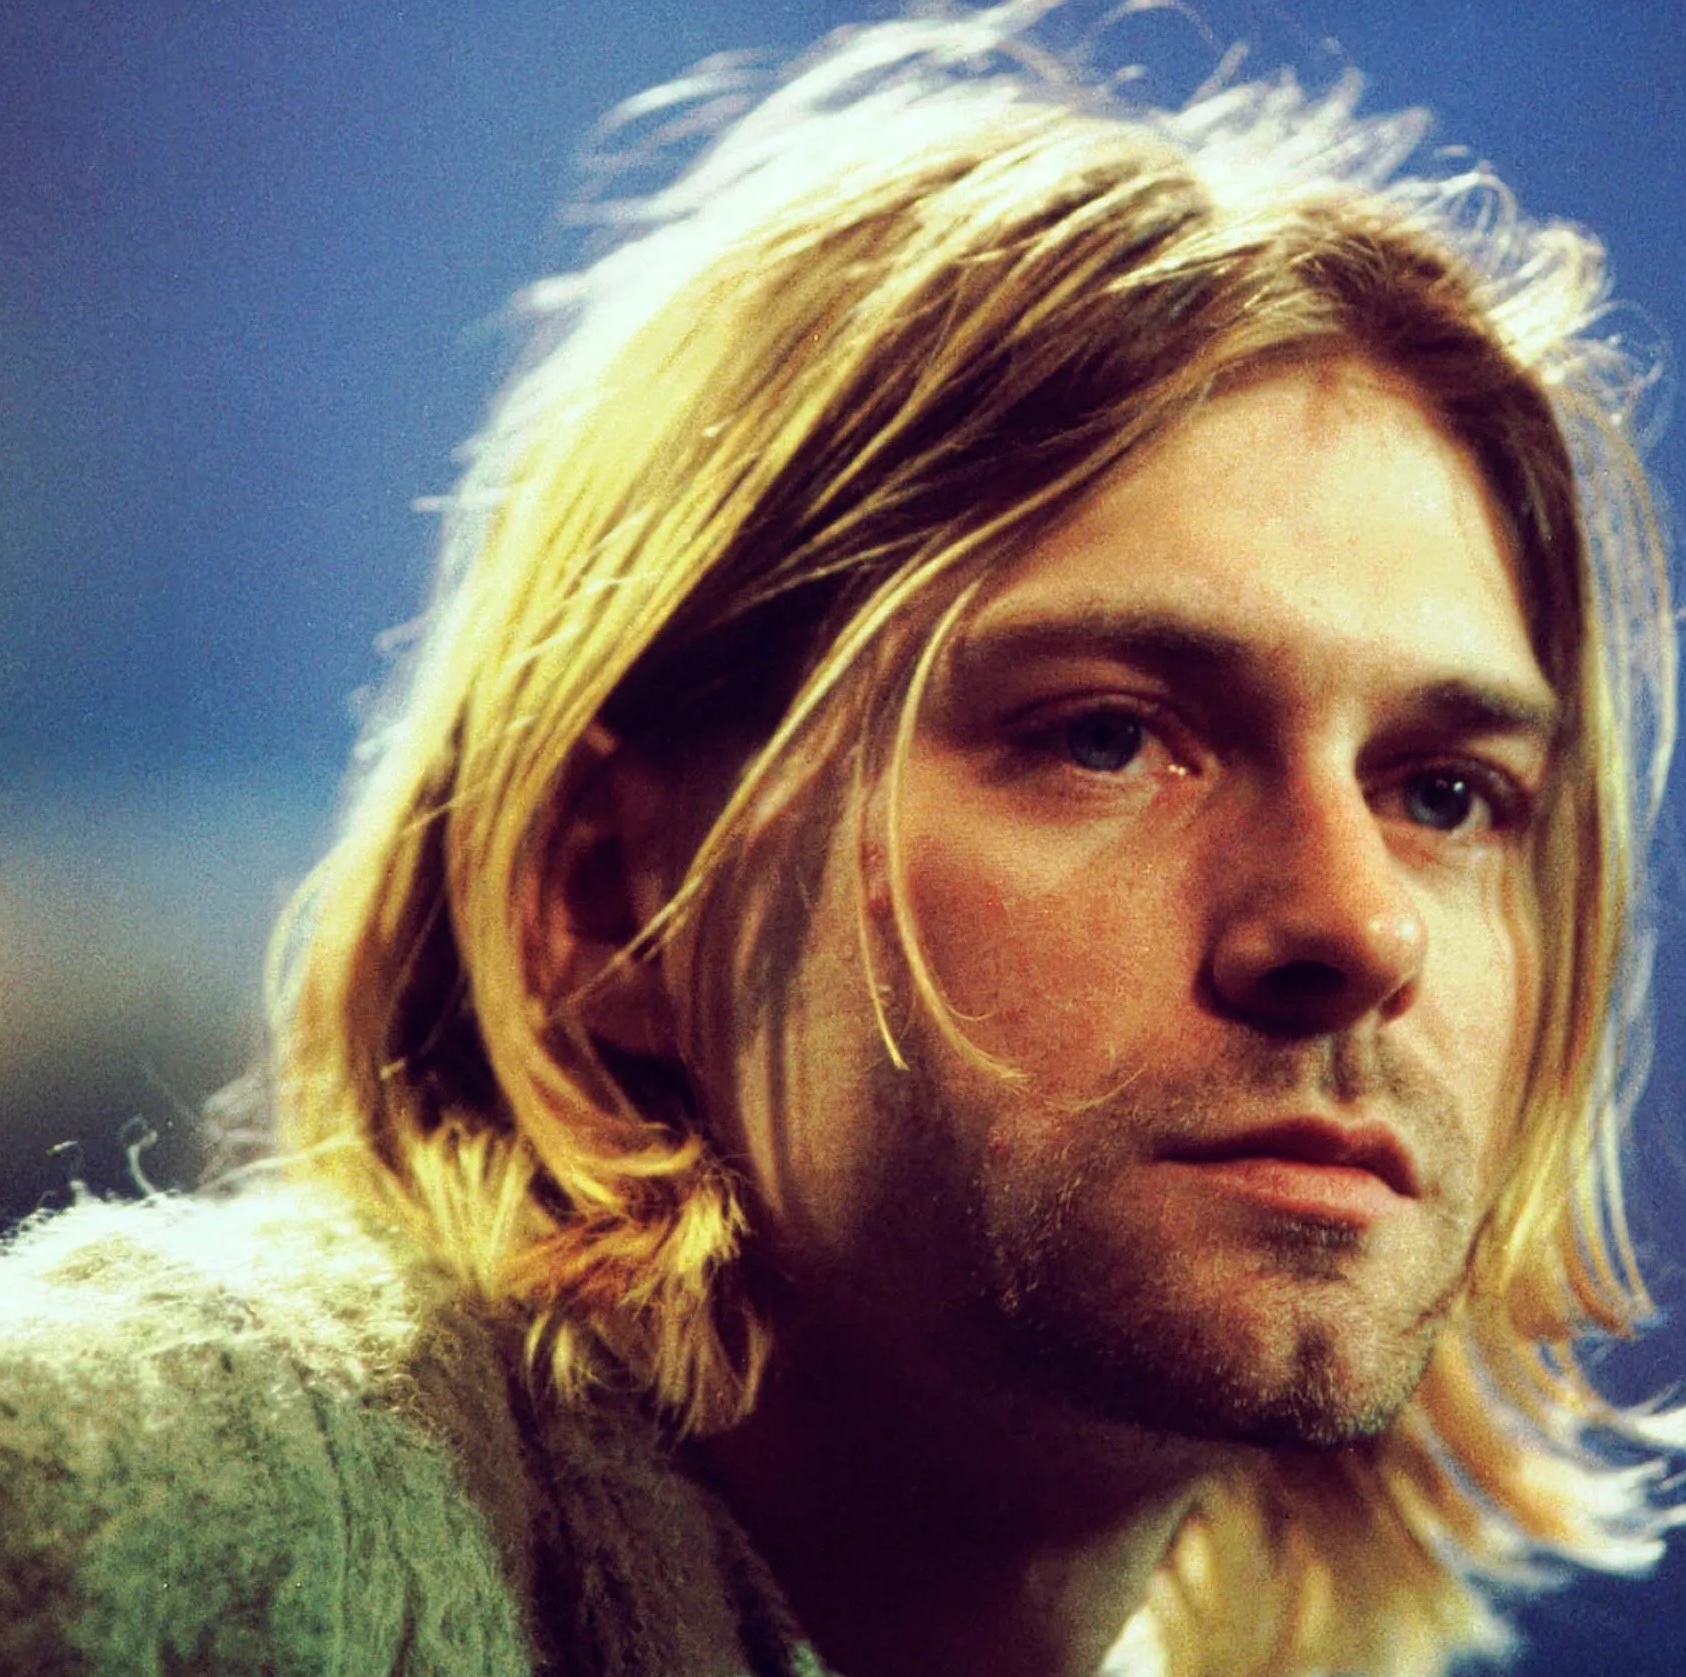 Kurt Cobain. Formed Nirvana in '87, and went from playing record store gigs and dive bars in the late 80's to putting out Nevermind, a record that knocked Michael Jackson out of the #1 spot in Jan of '92. Back then, something like that was unheard of and considered impossible in the industry.
<br>
<br>
For the next couple of years Nirvana were arguably one of the biggest and most popular rock bands in the world, but Cobain was already thinking of ways to essentially sabotage the bands popularity because he was so uncomfortable with how famous they got while dealing with his own inner demons and drug addiction. -DrRDuke